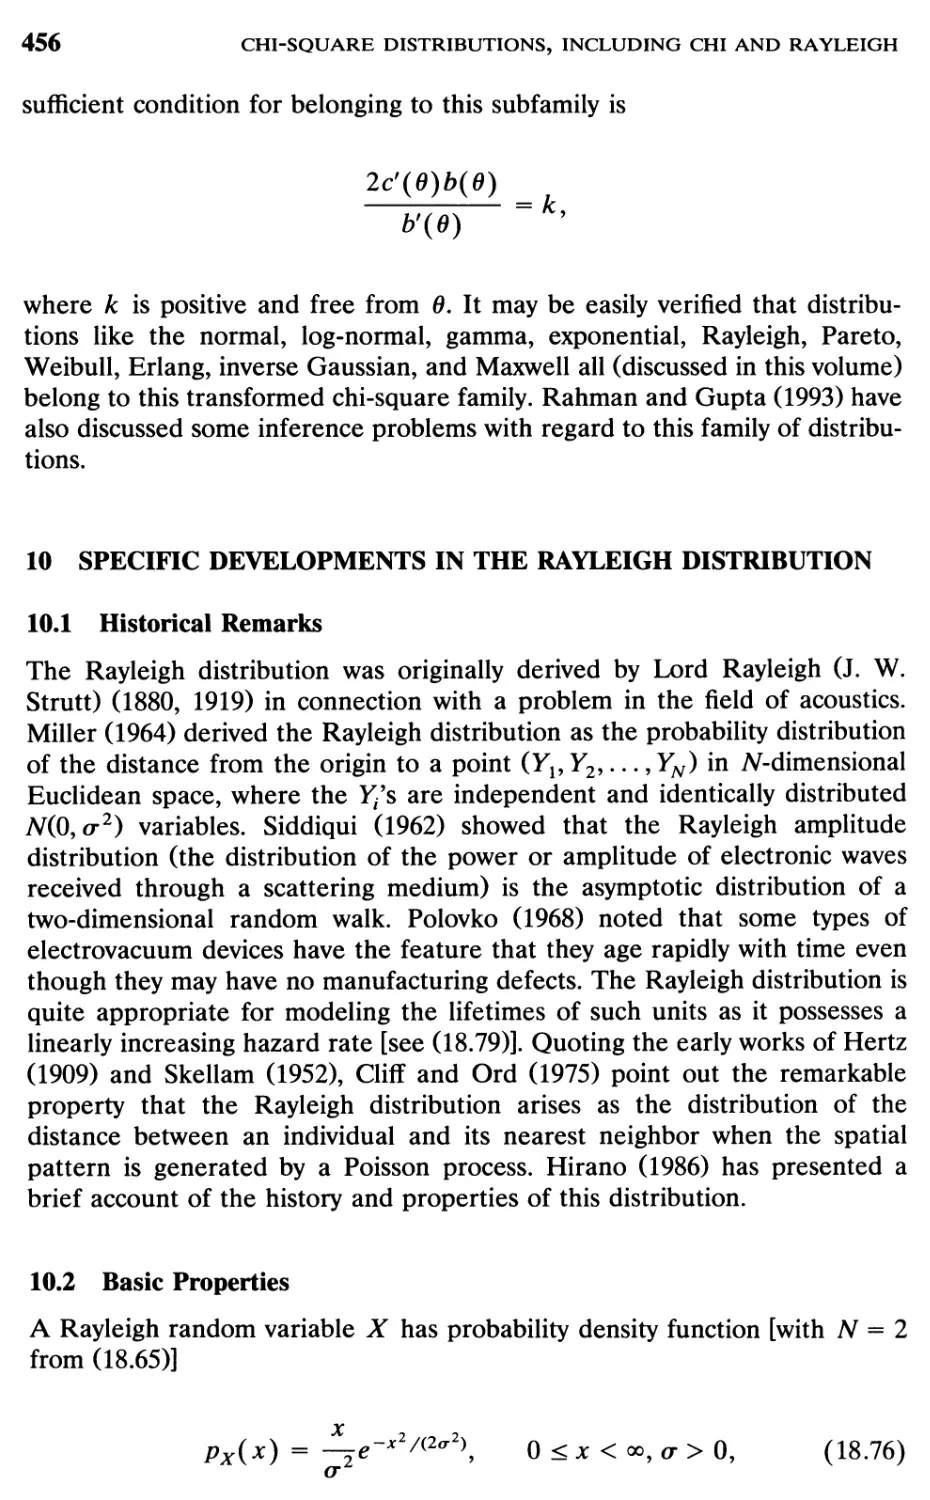 10 Specific Developments in the Rayleigh Distribution, 456
10.2 Basic Properties, 456